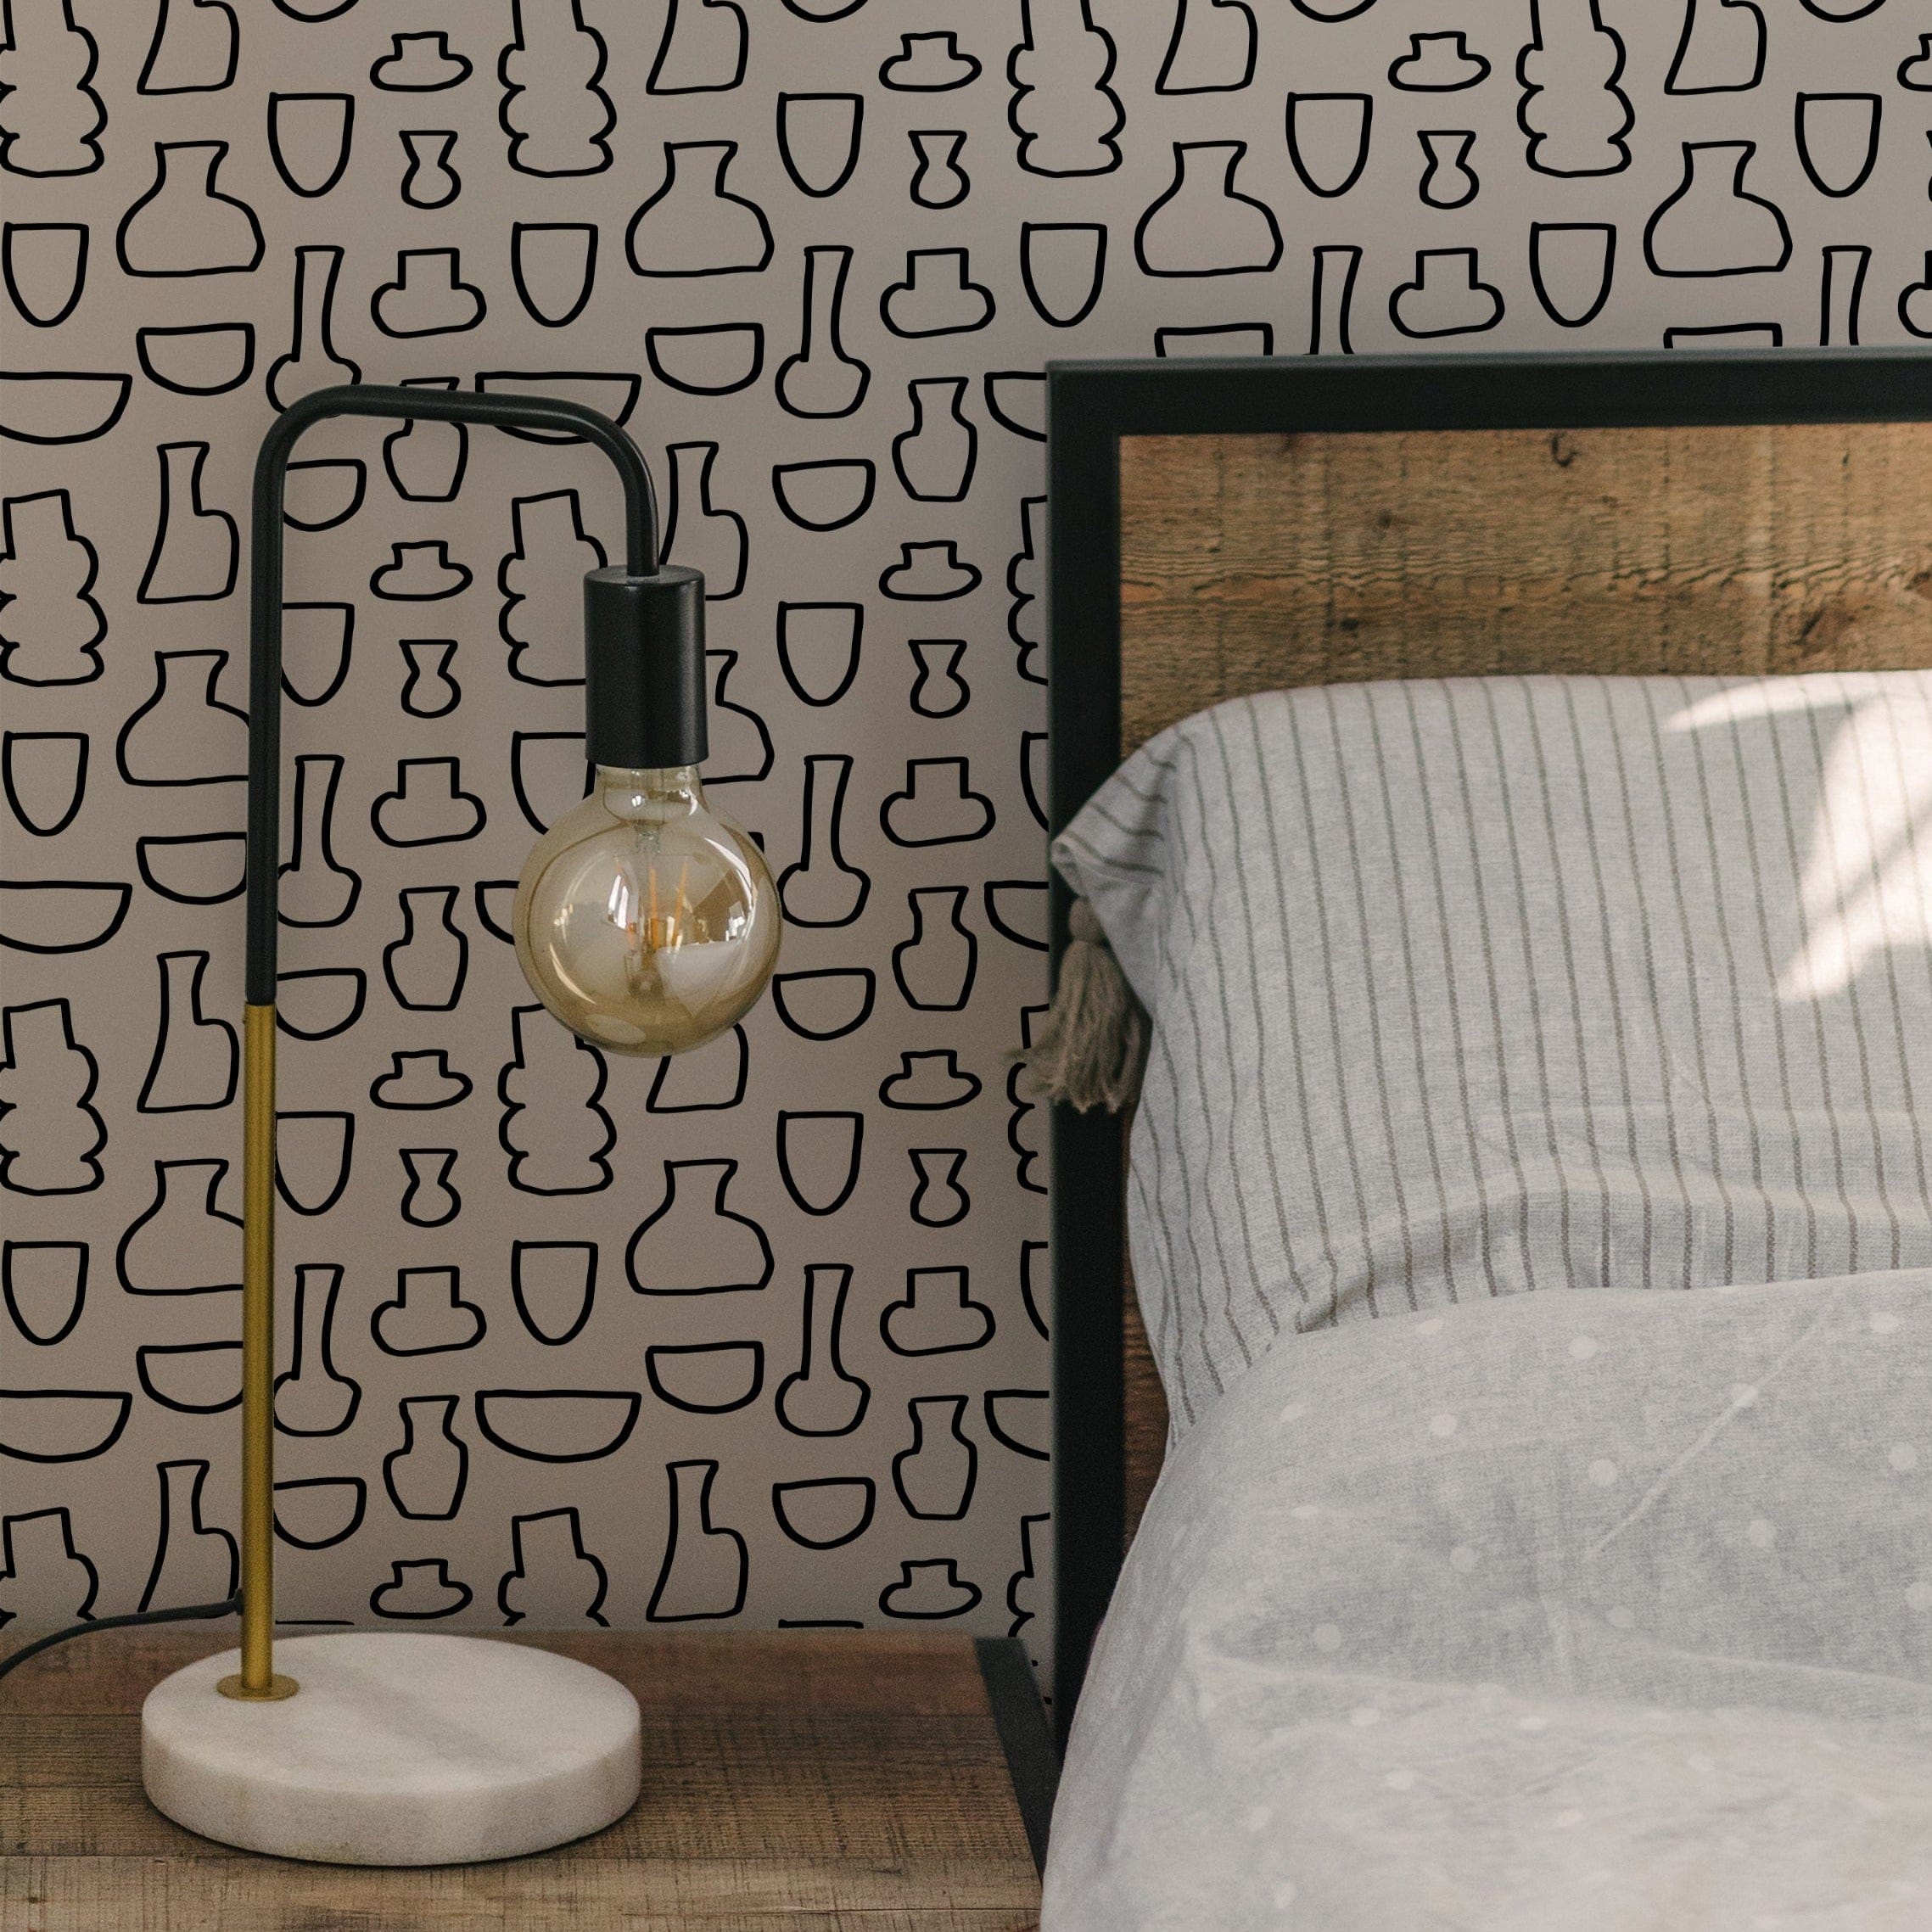 A cozy bedroom setup showcasing the Bohemian Ceramic Wallpaper, adorned with an array of black abstract vase shapes on a light background. The room features a simple bed with striped bedding and a modern lamp, enhancing the bohemian charm of the space.